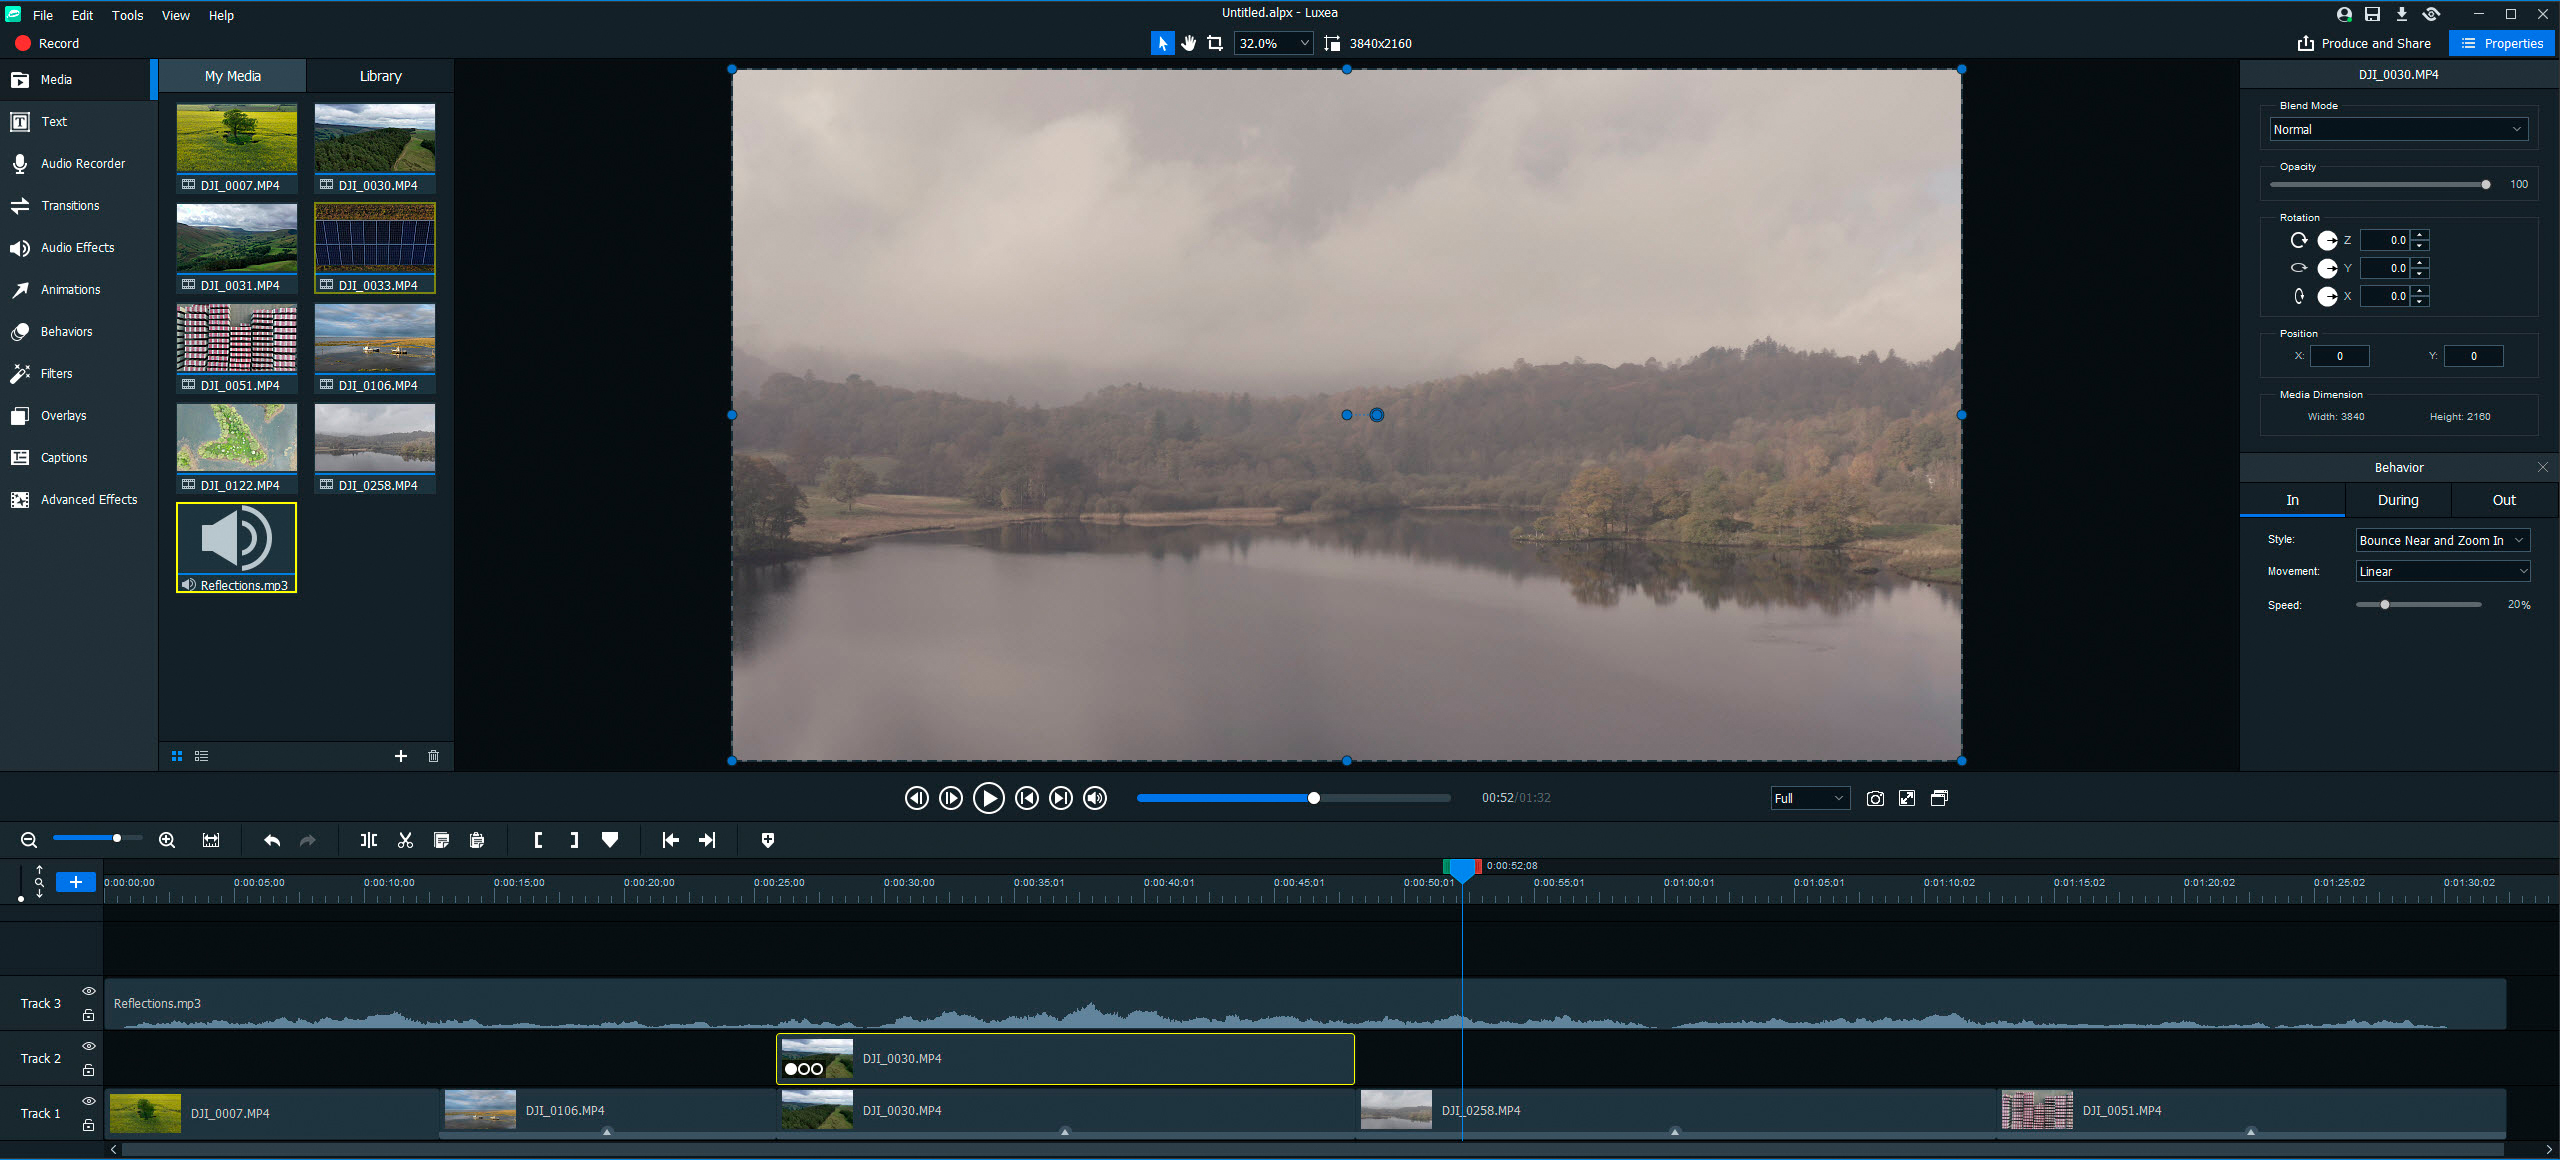 ACDSee Luxea Video Editor 7.1.3.2421 for mac download